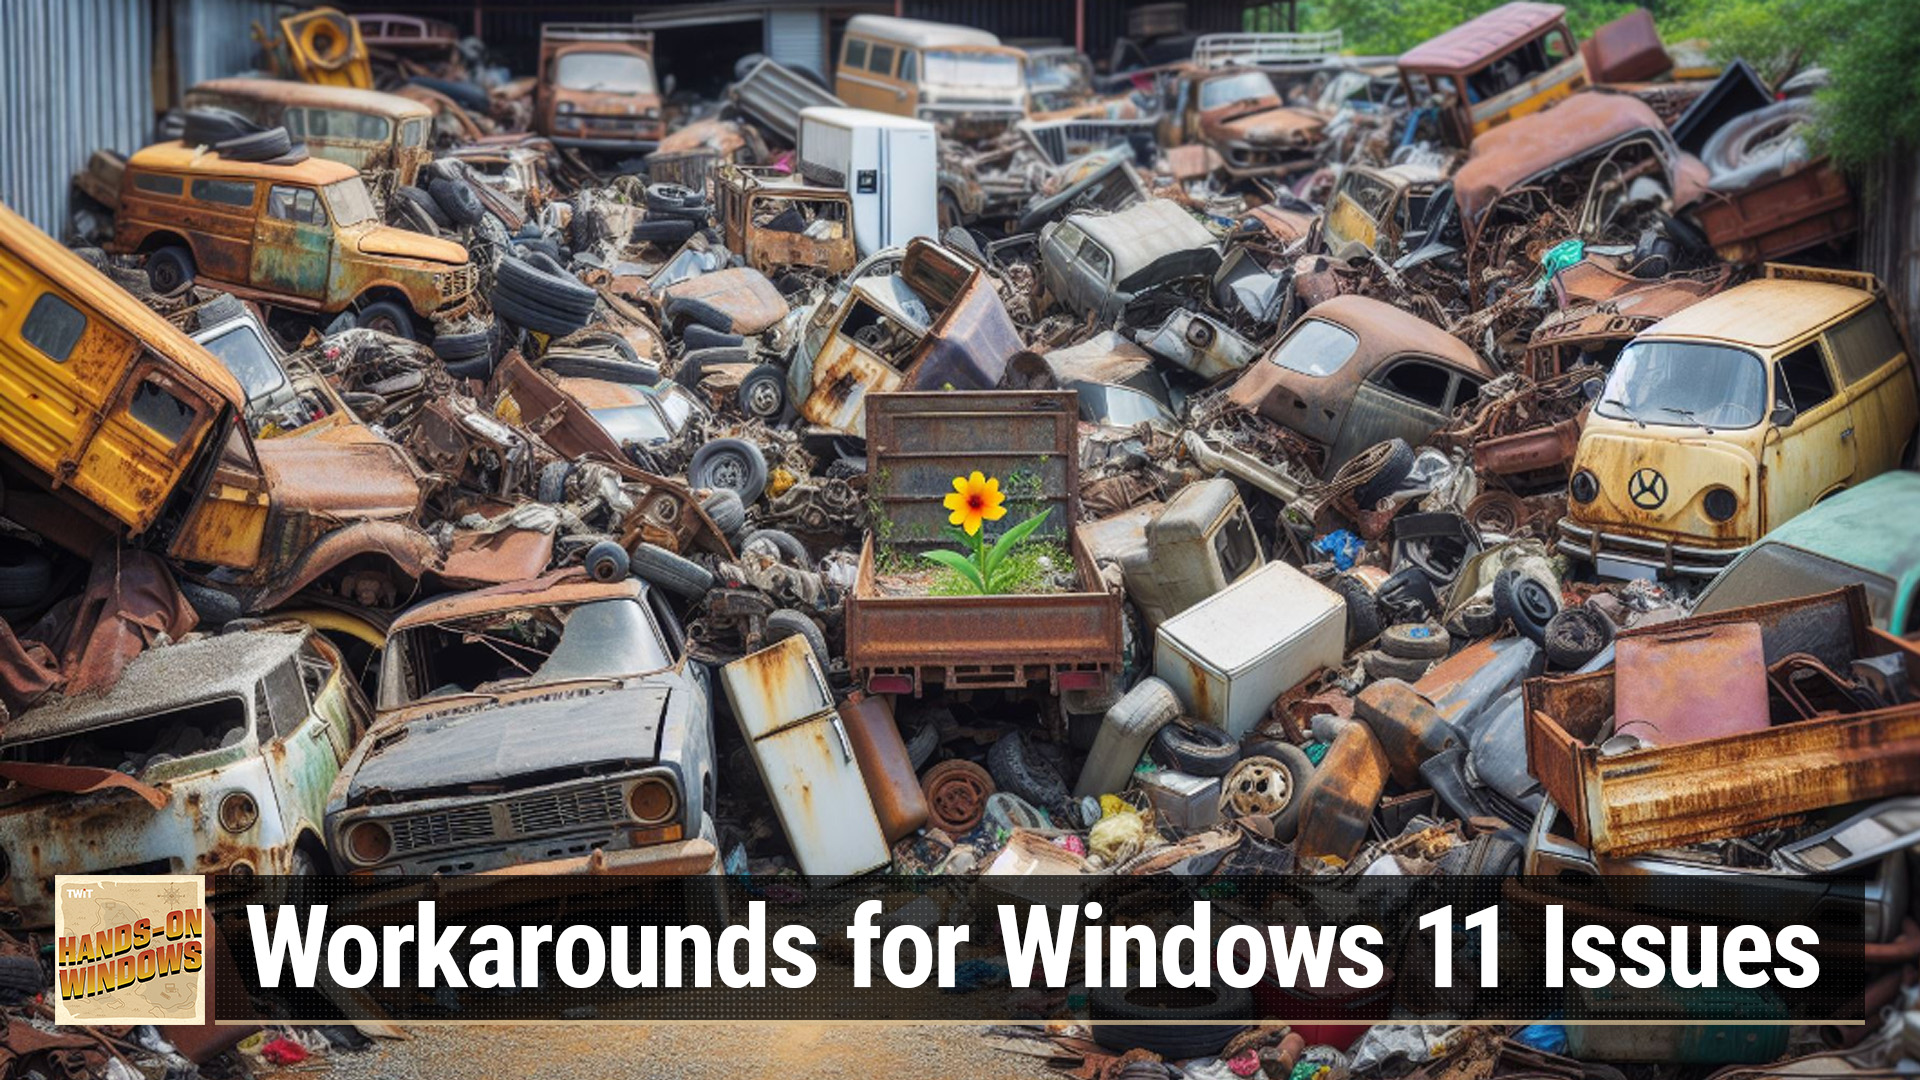 Workarounds for Windows 11 Issues (Hands-On Windows #88)